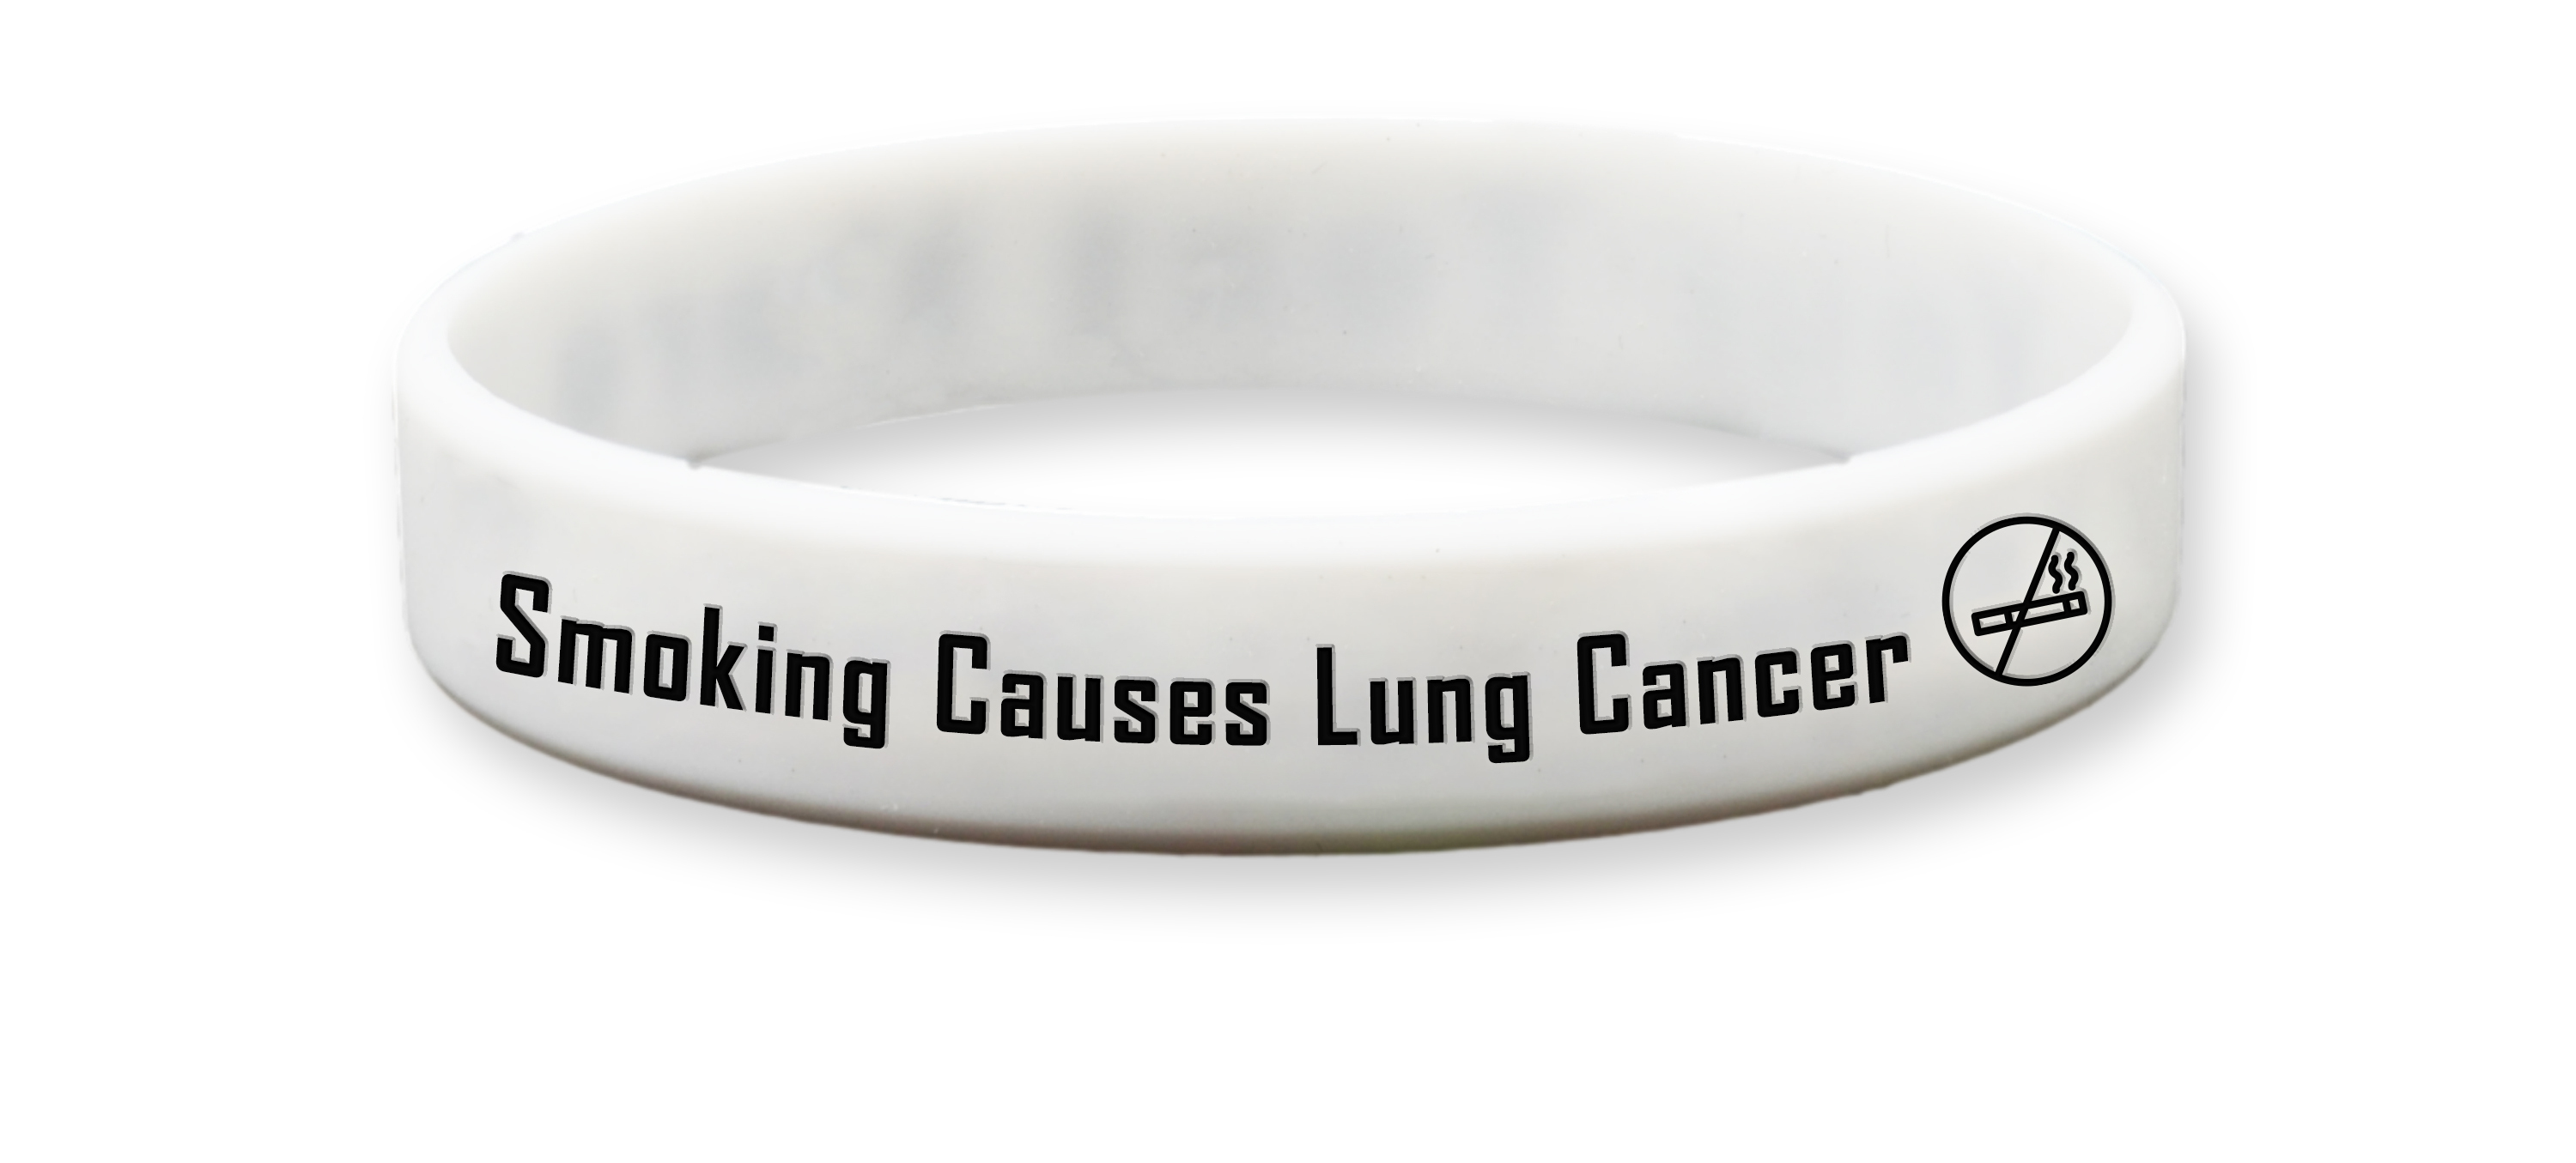 Smoking Causes Lung Cancer White Wristband depicting one of the leading causes of cancer related deaths.